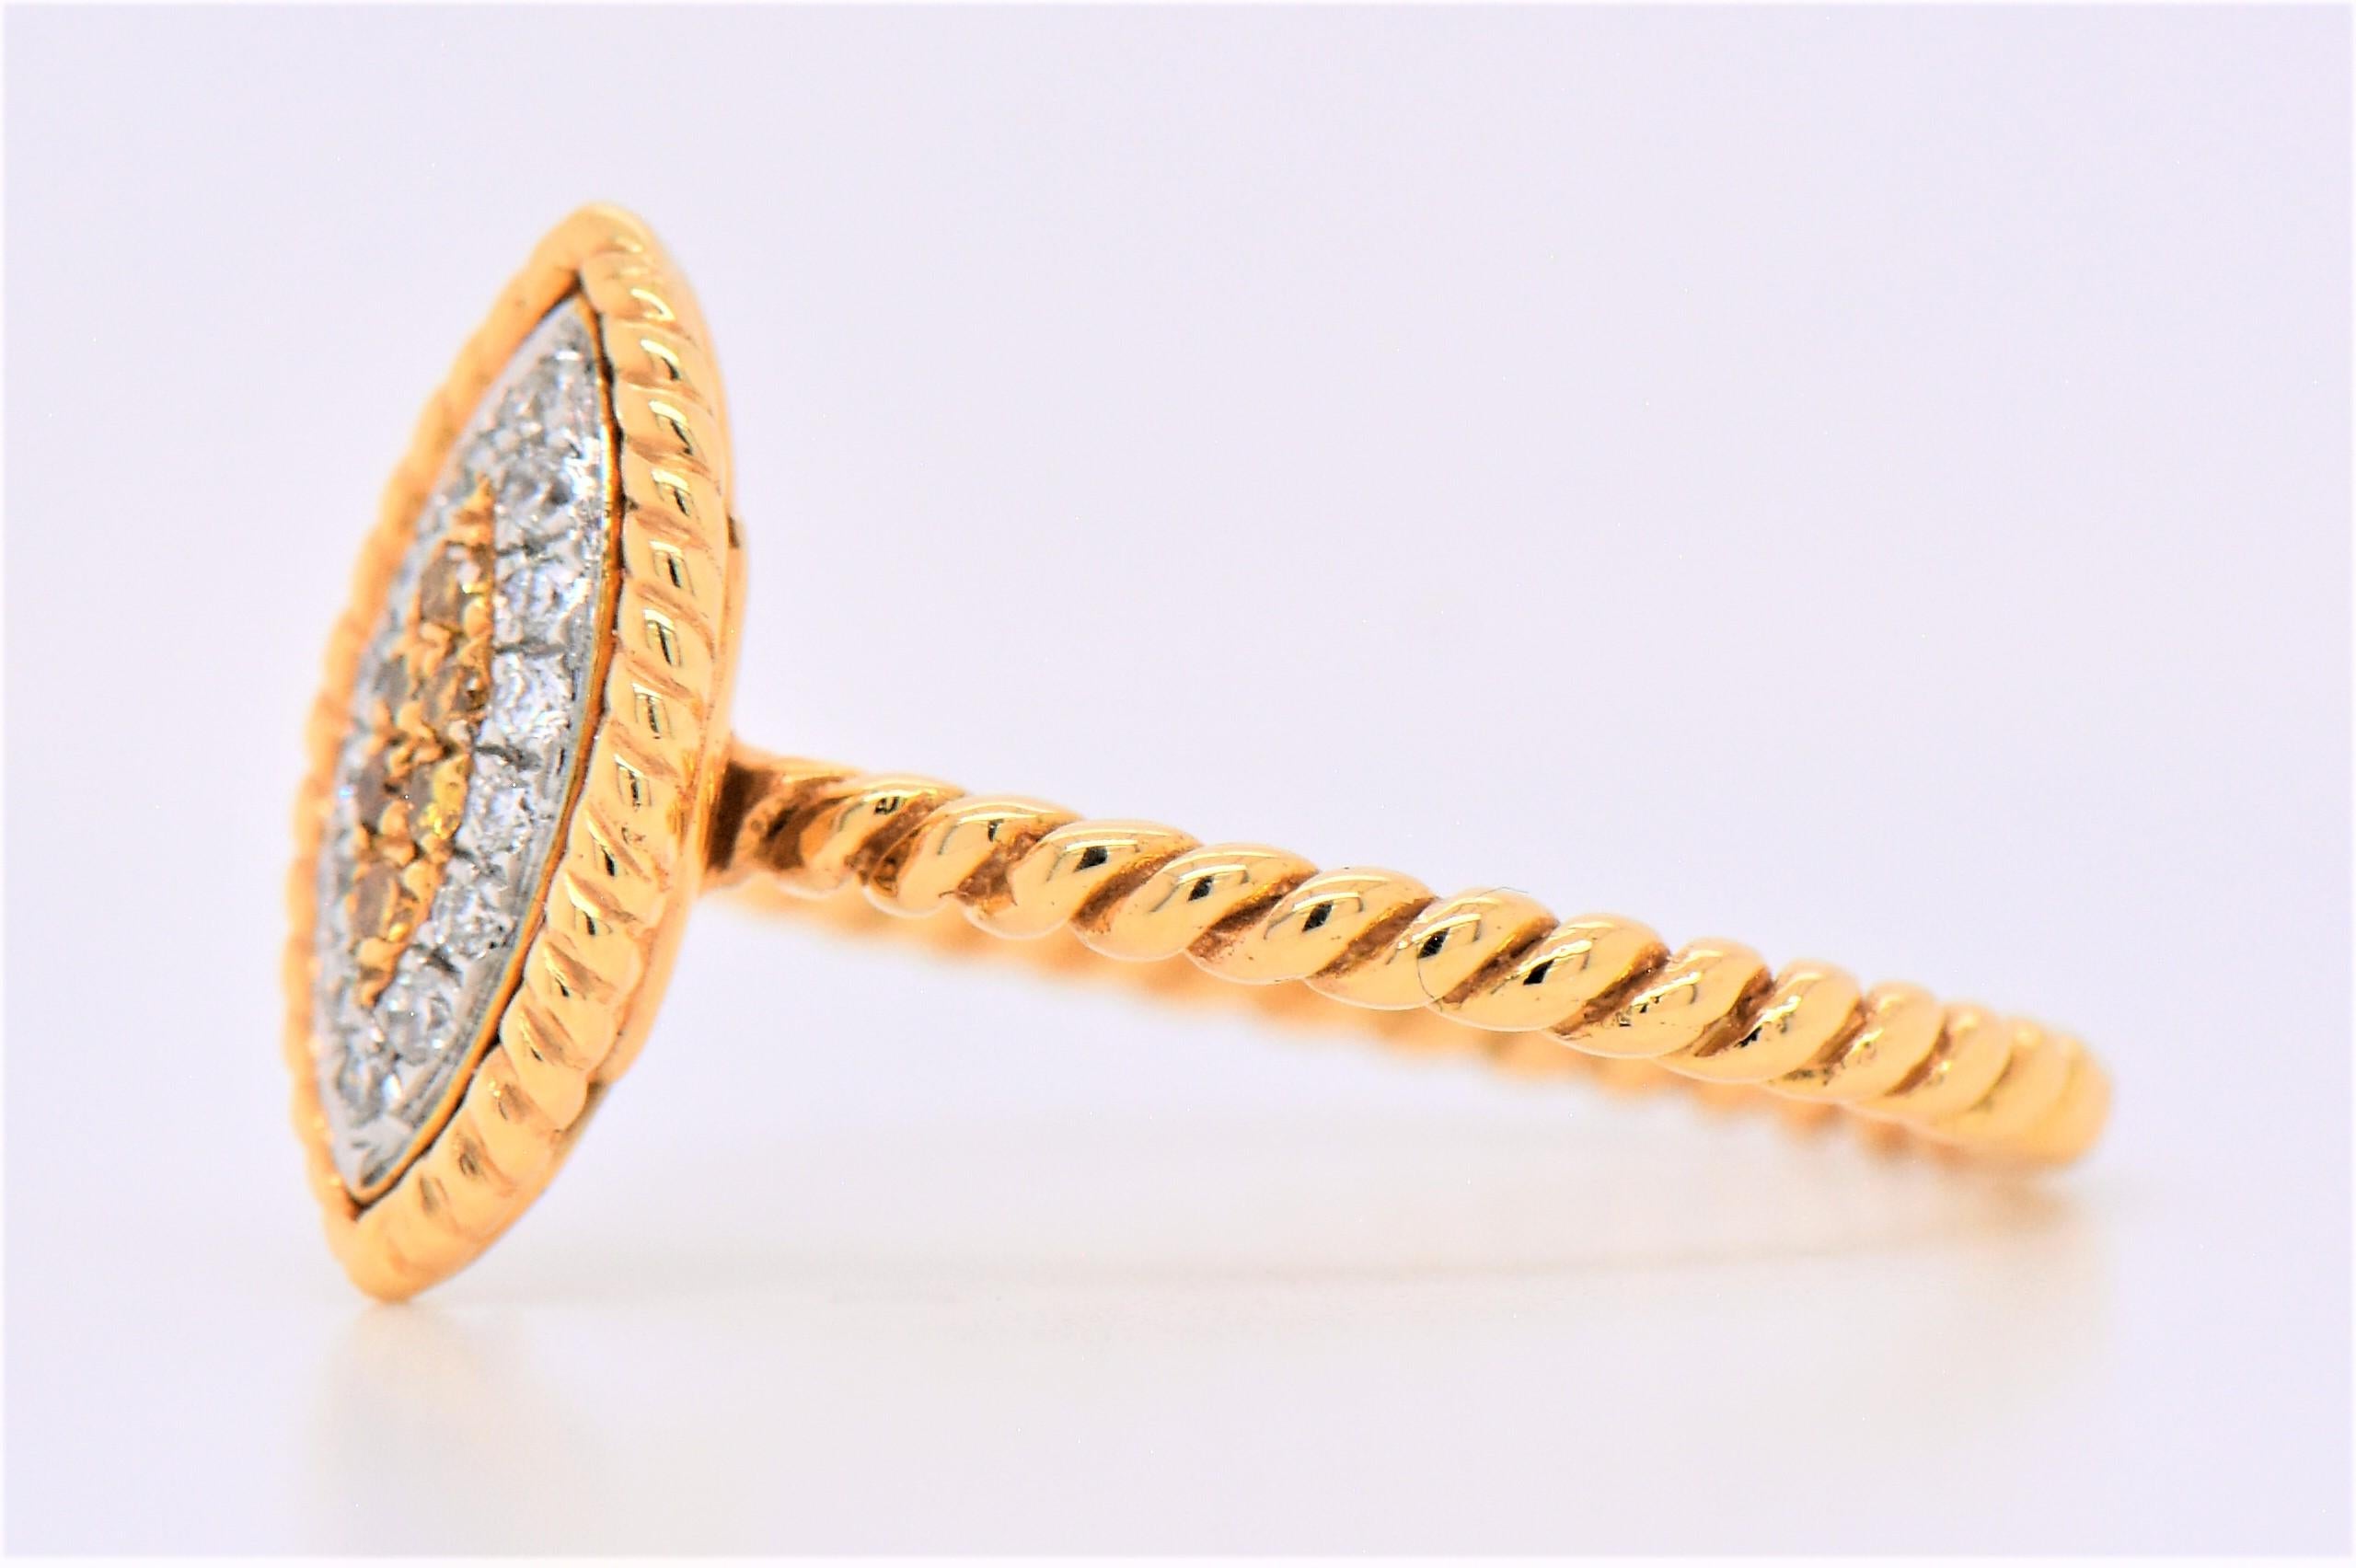 Dazzling diamond and Natural Fancy Yellow Diamonds snake eye set on a gold band. Diamonds, 0.10 total carat weight, clarity: VS Diamond Color: G. Fancy Yellow Diamonds 0.04 total carat weight 18K yellow gold.

Diamond Breakdown:
16 Round White